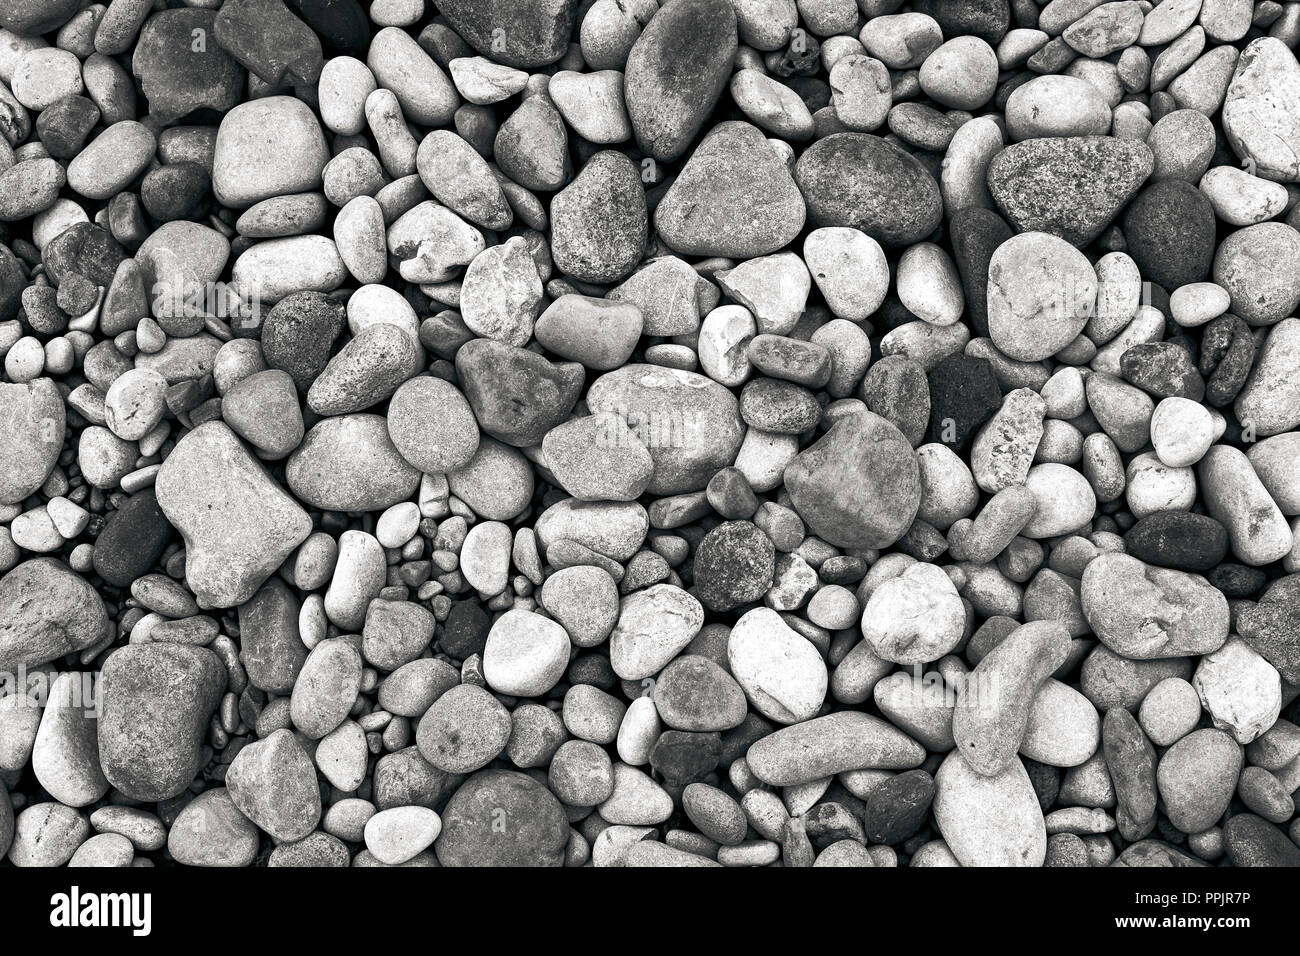 Riverbed pebbles, black and white monochrome background image. Stock Photo